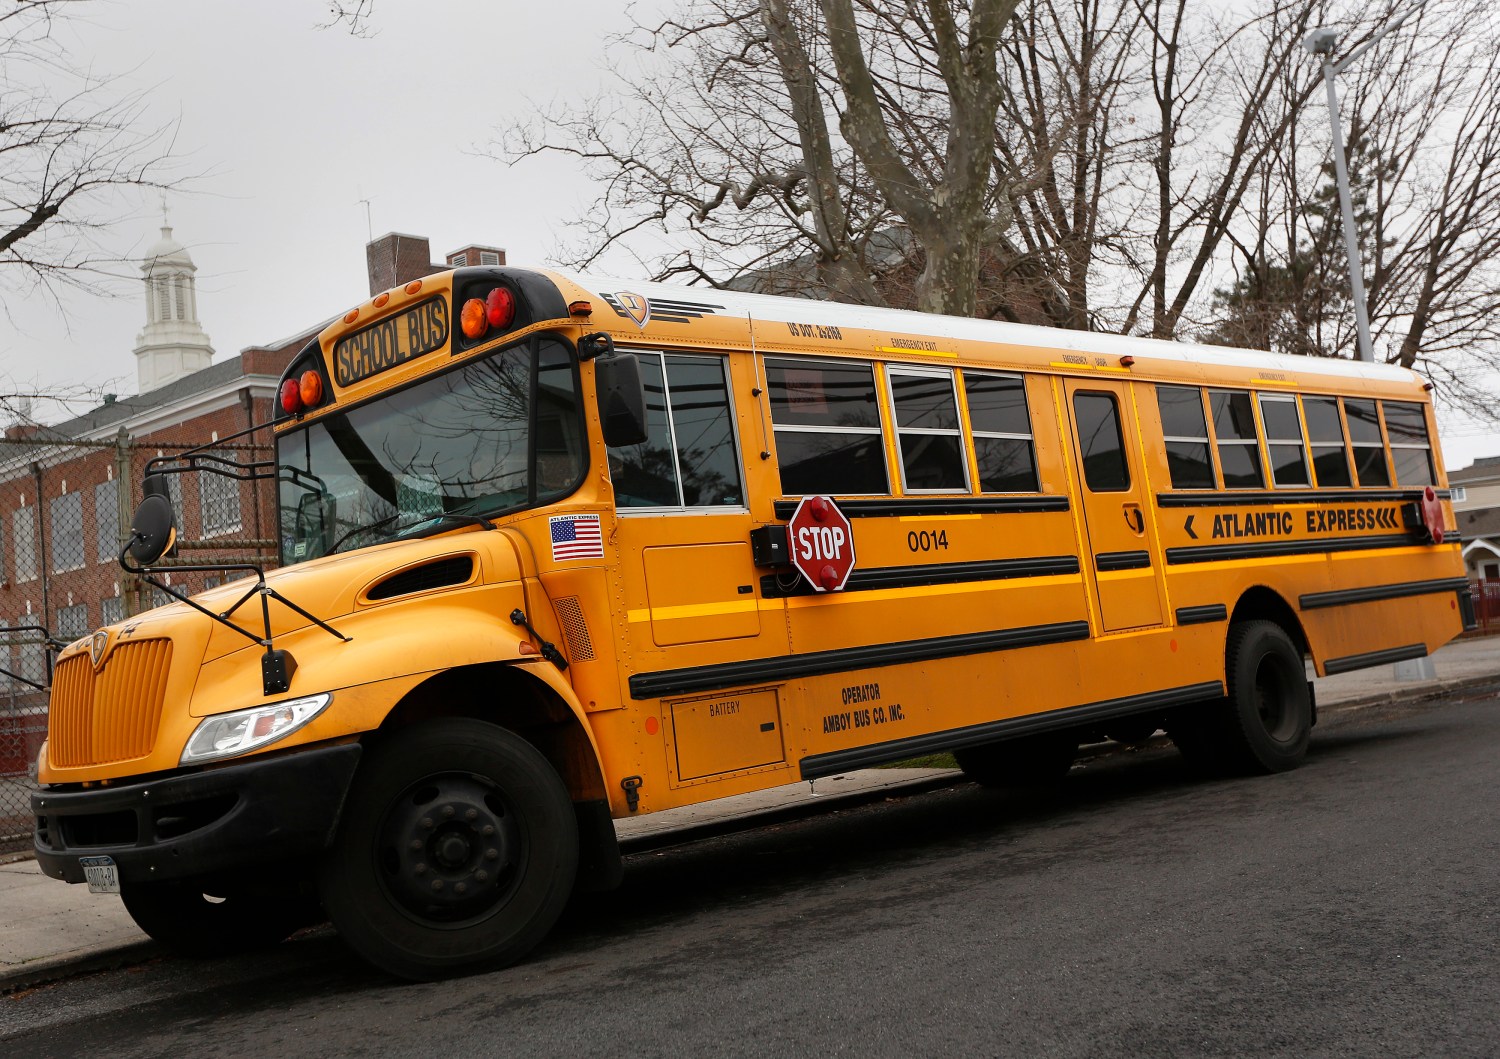 A school bus used for transporting New York City public school students is seen parked in front of a school in the Queens borough of New York January 15, 2013. New York City school bus drivers will go on strike on Wednesday, an action that Mayor Michael Bloomberg said would complicate the commute of more than 152,000 students in the nation's largest public school system. REUTERS/Shannon Stapleton (UNITED STATES - Tags: EDUCATION) - GM1E91G074101